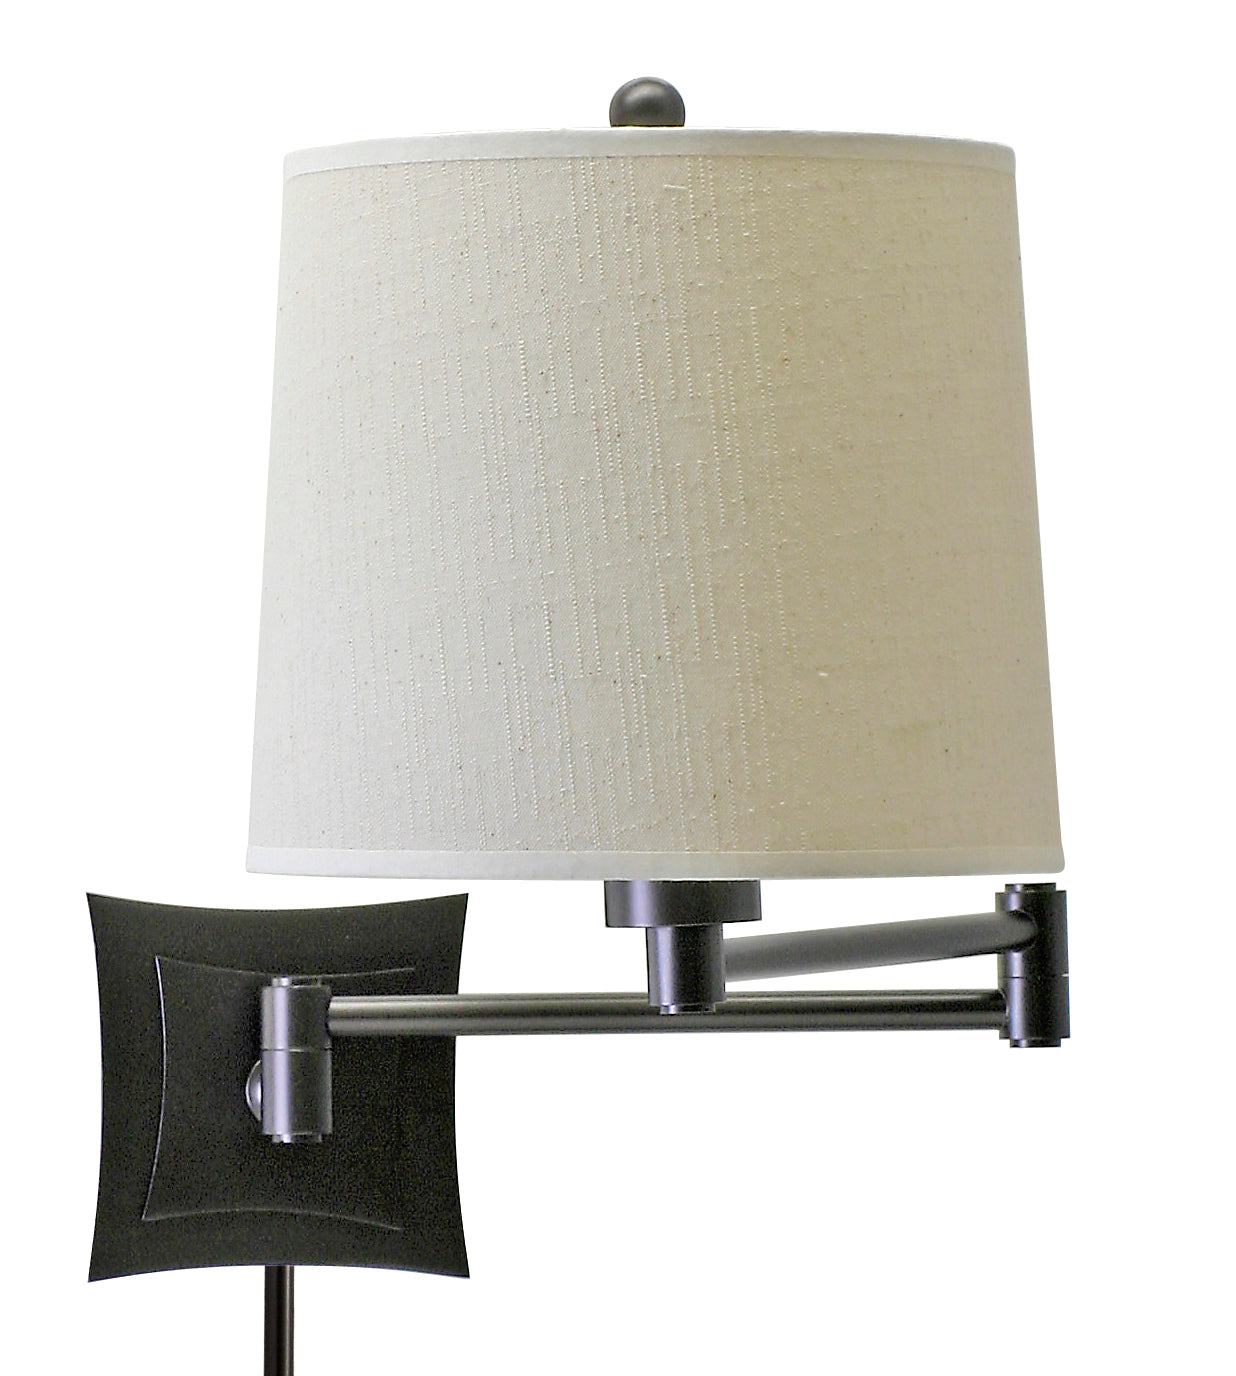 House of Troy Wall Swing Arm Lamp Oil Rubbed Bronze WS752-OB